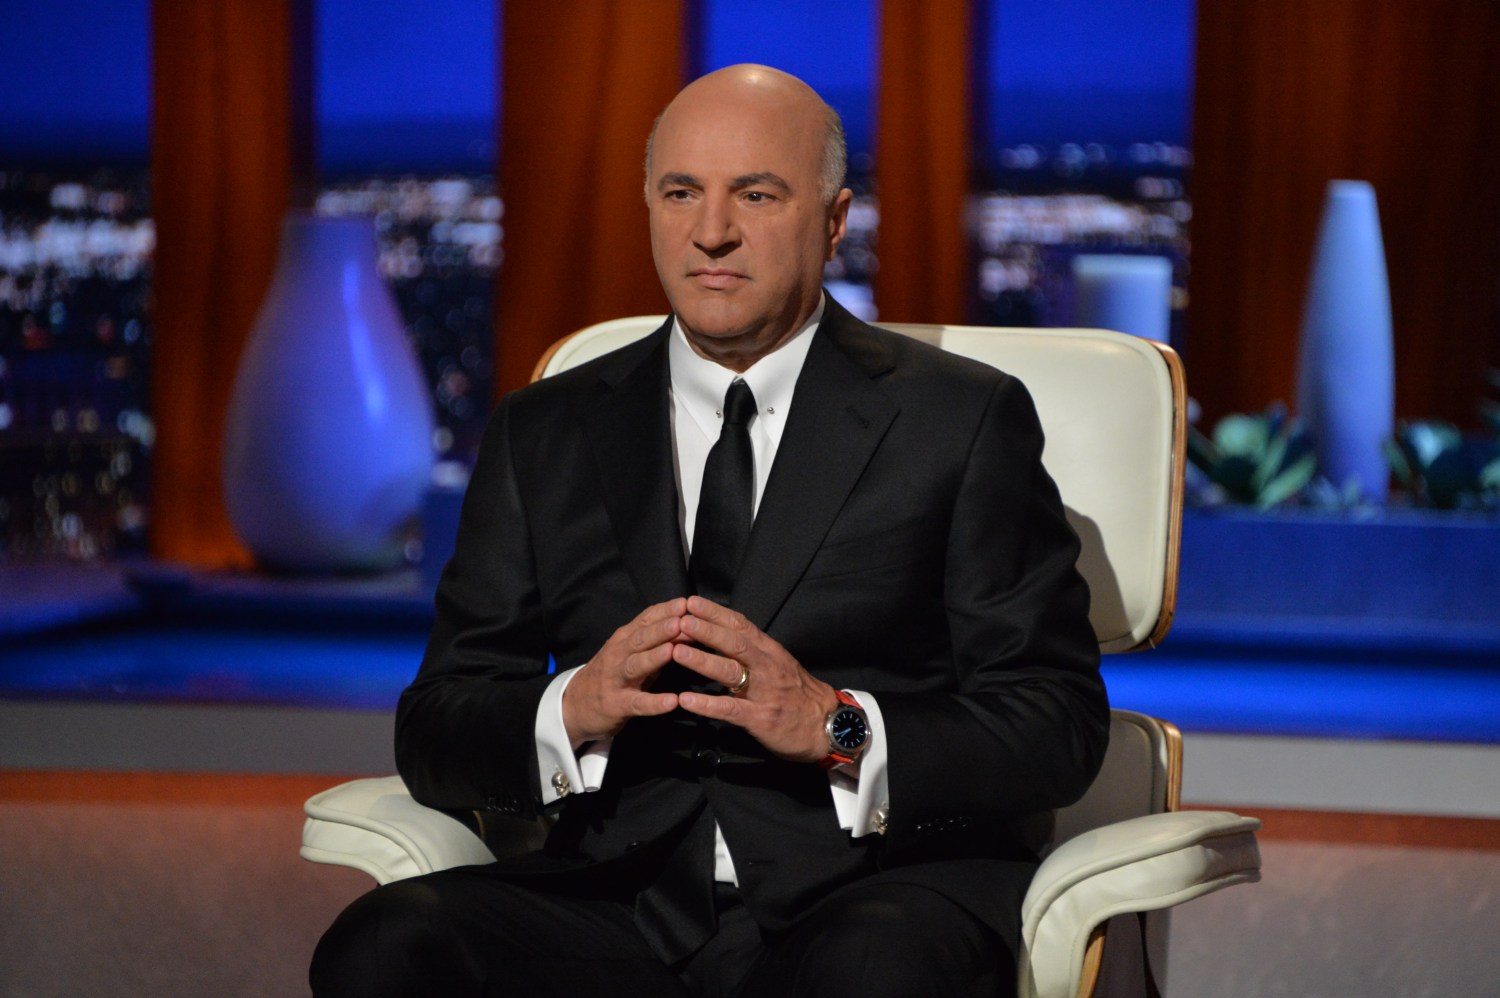 Shark Tank Premiere Goes Live With Uncut Pitches, Viewer Input